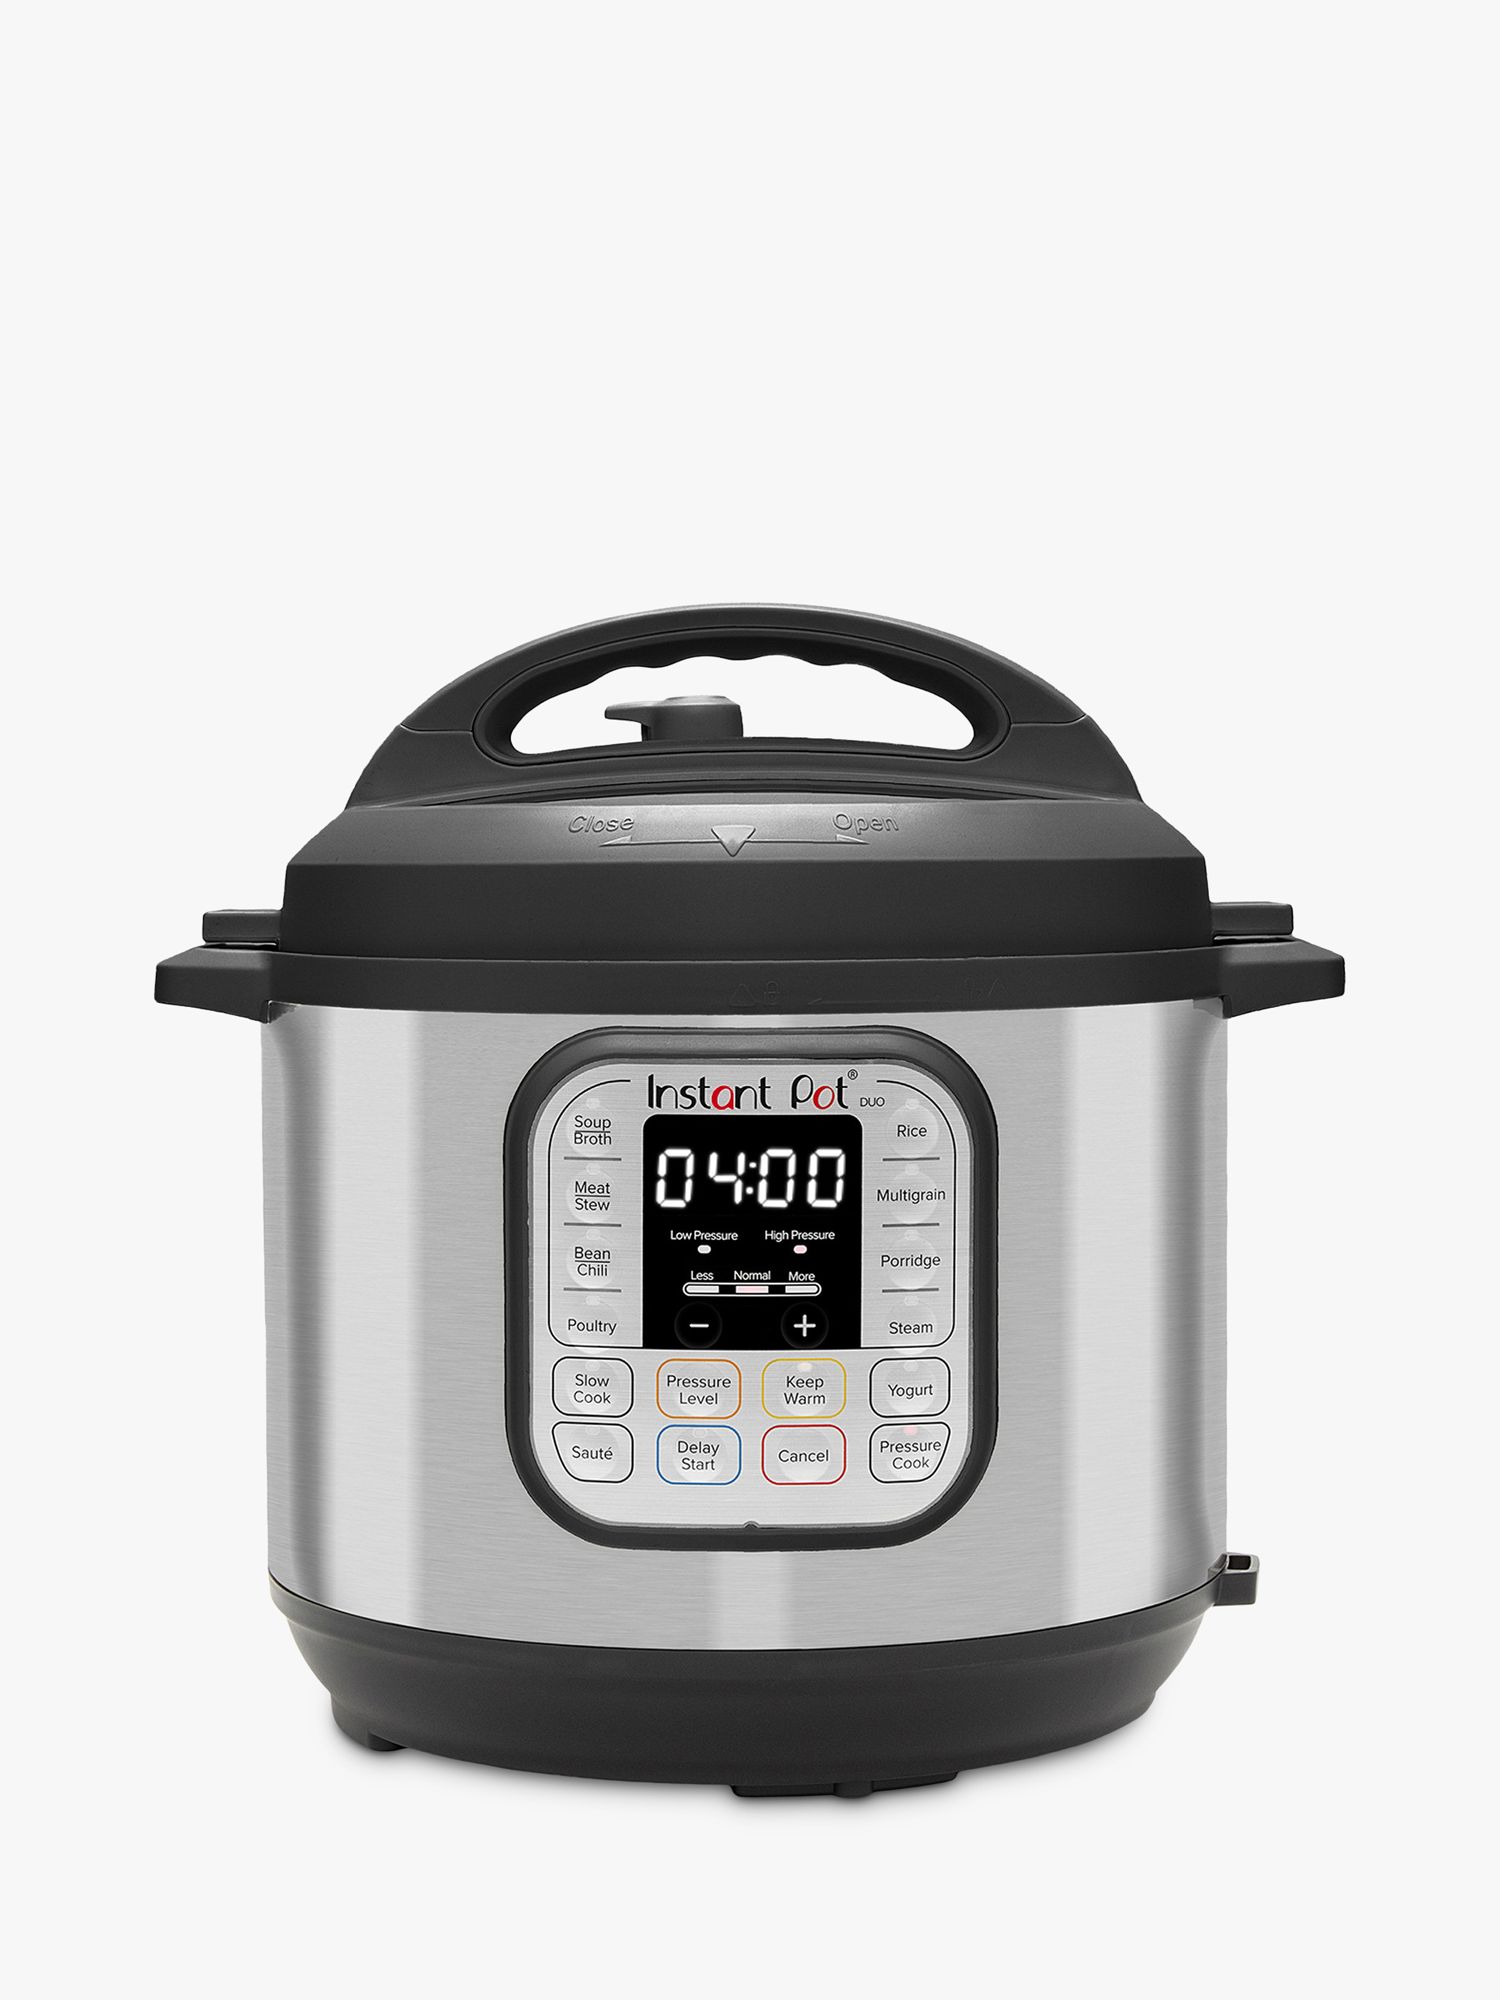 Instant Duo 6 7-in-1 Multi-Use Electric Pressure Cooker, 5.7L, Stainless  Steel